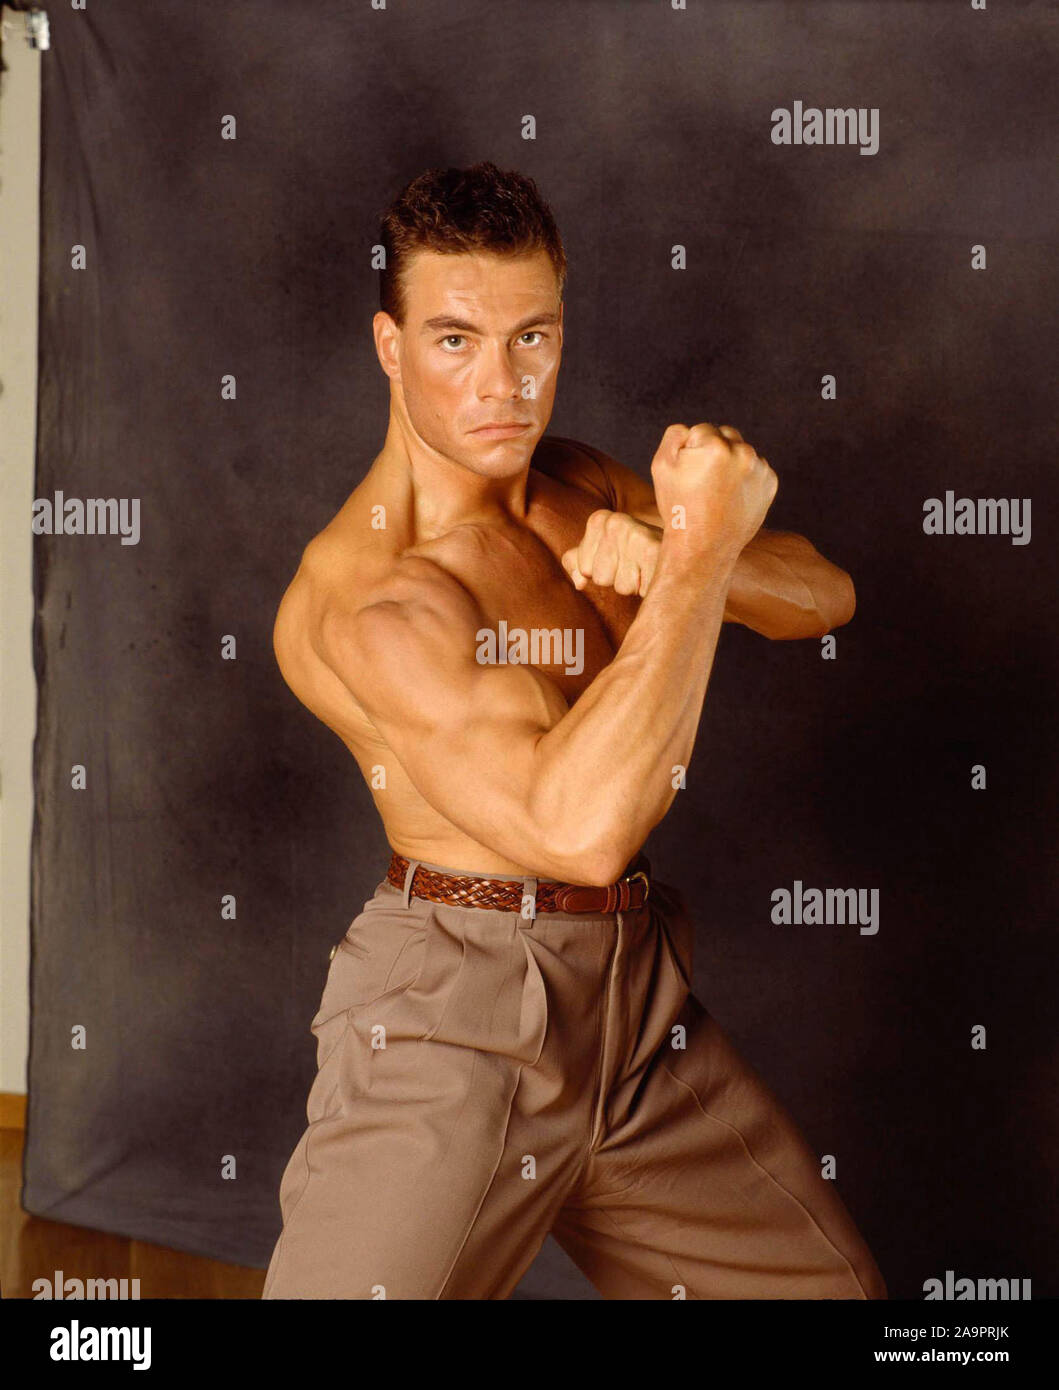 JEAN-CLAUDE VAN DAMME in DOUBLE IMPACT (1991), directed by SHELDON LETTICH. Credit: STONE GROUP PICTURES/COLUMBIA TRI-STAR / Album Stock Photo